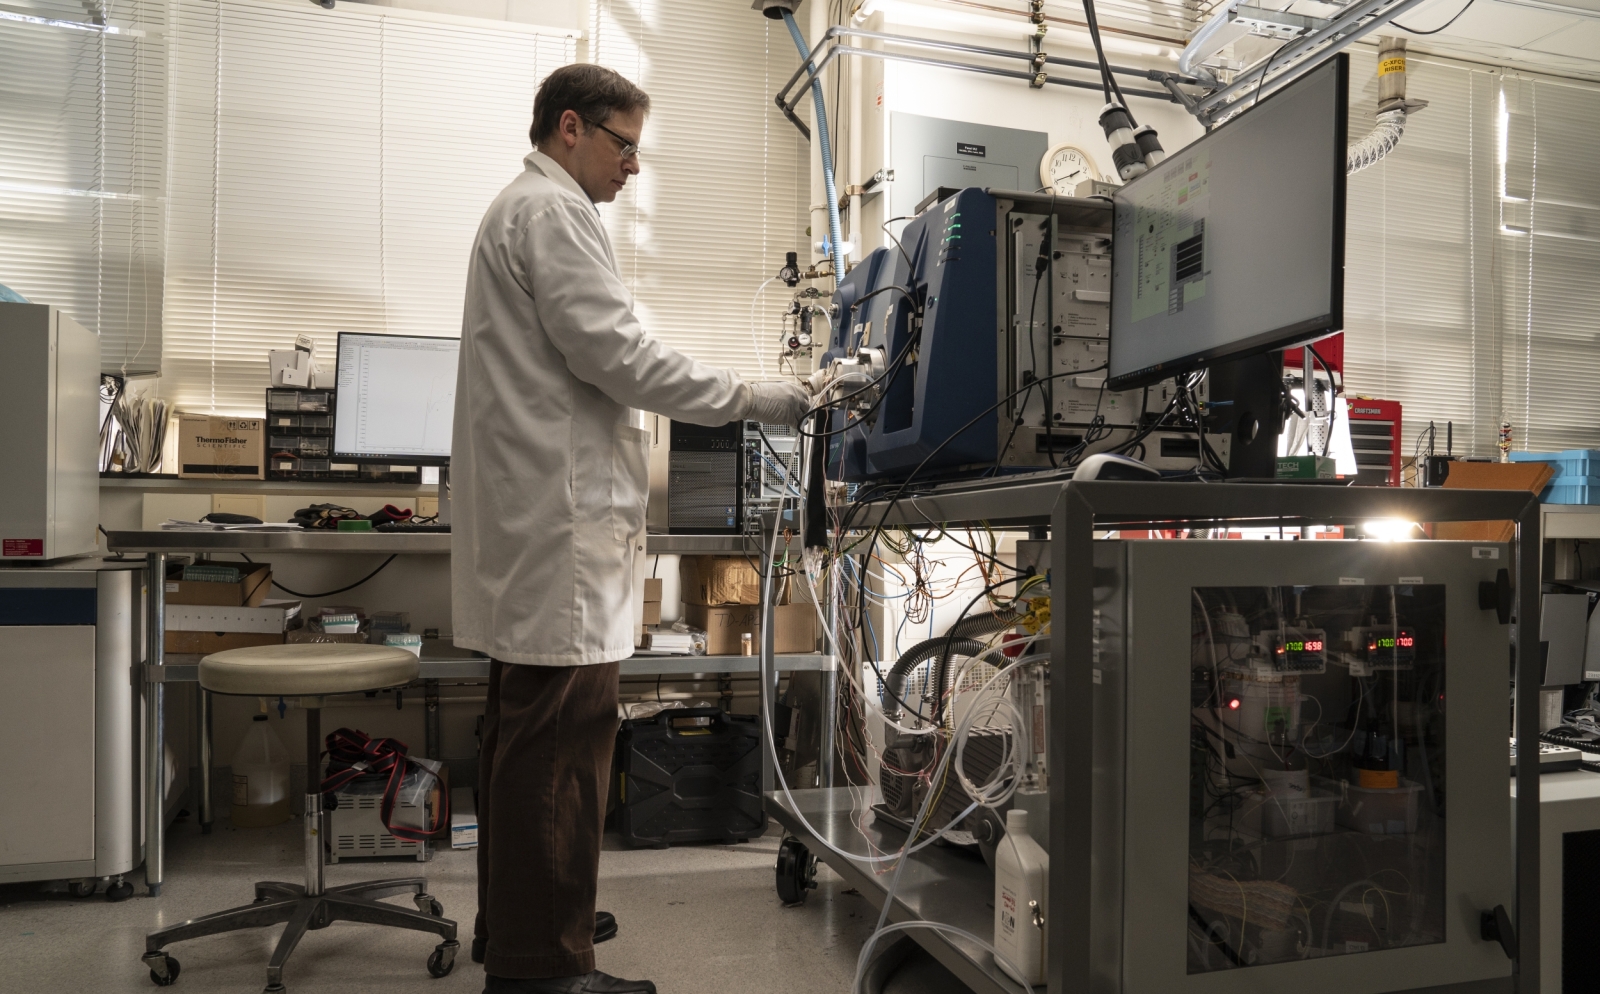 Laboratory staff member Ted Mendum stands while performing system checks on a mass spectrometer inside the laboratory. Photo: Glen Cooper